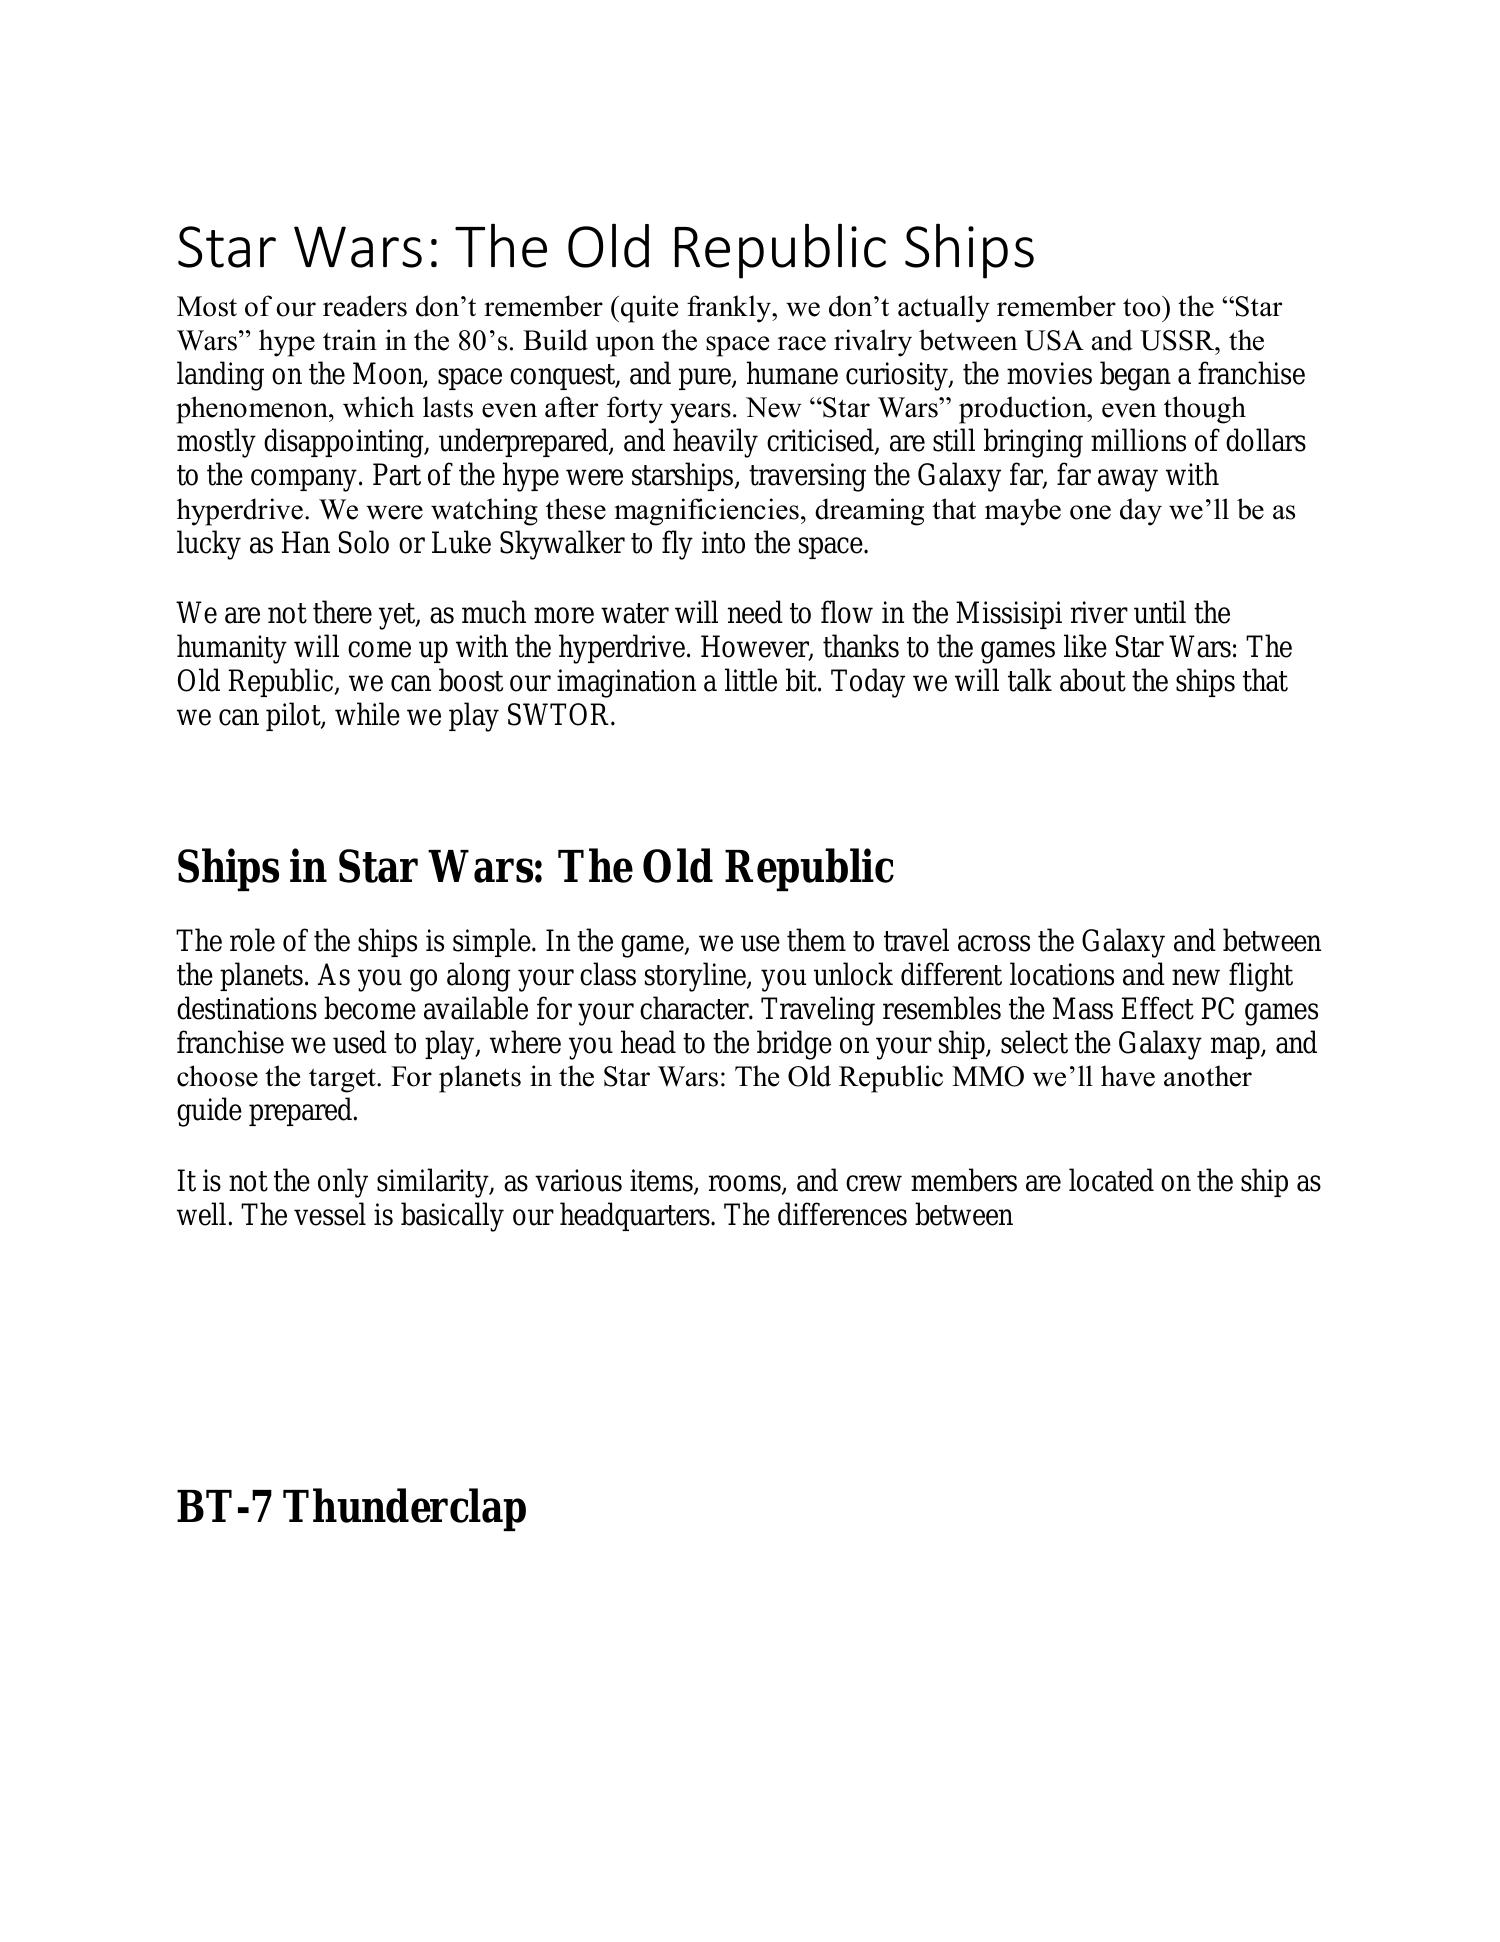 star wars thesis statement examples